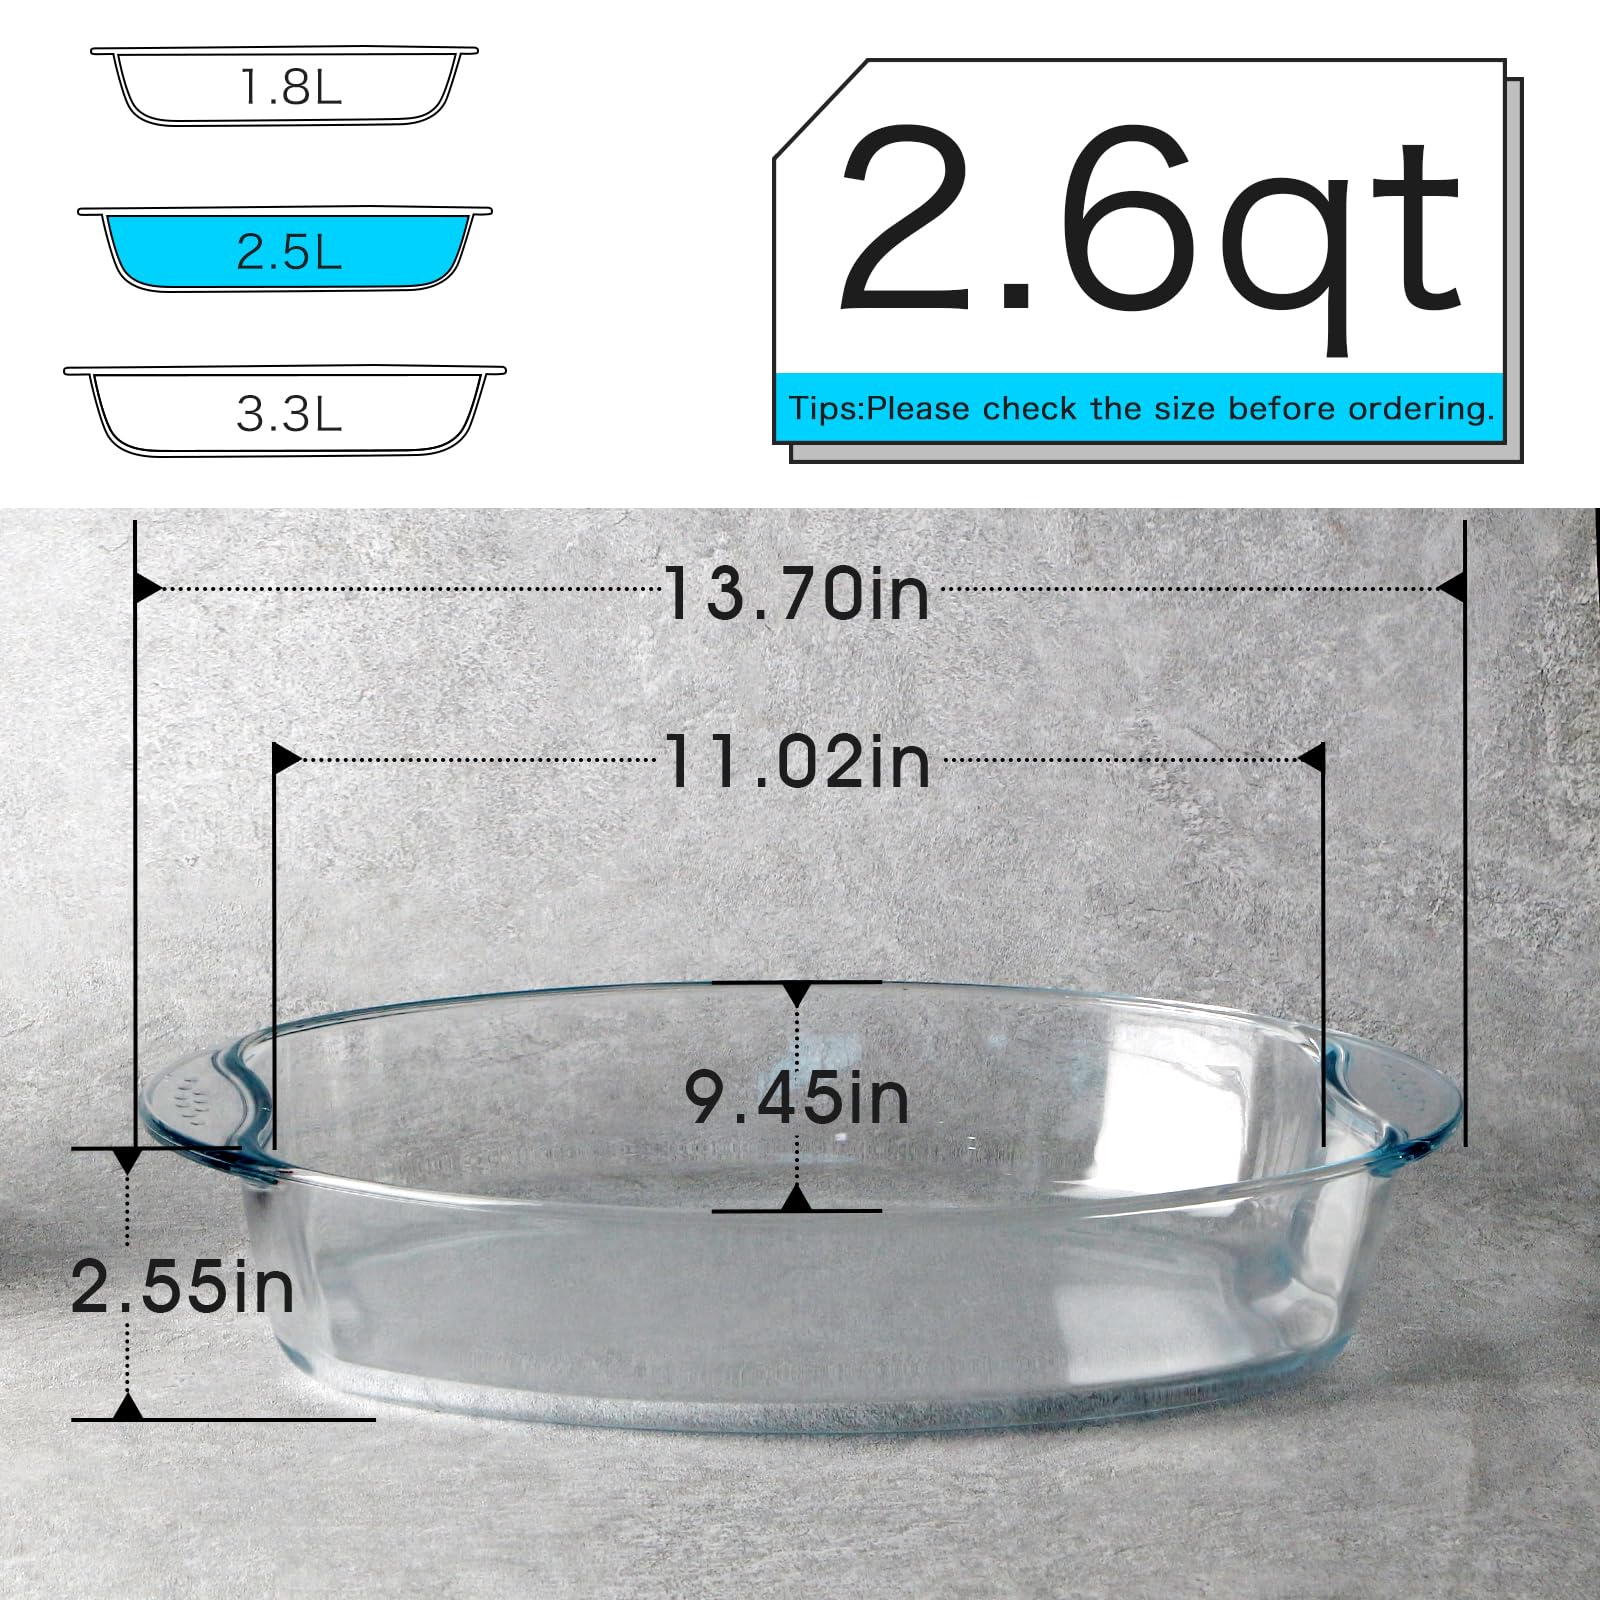 NUTRIUPS 2.6 Quart Oval Deep Glass Baking Dish for Oven, Tempered Glass Bakeware, Oval Glass Baking Pan Bakeware for Cooking